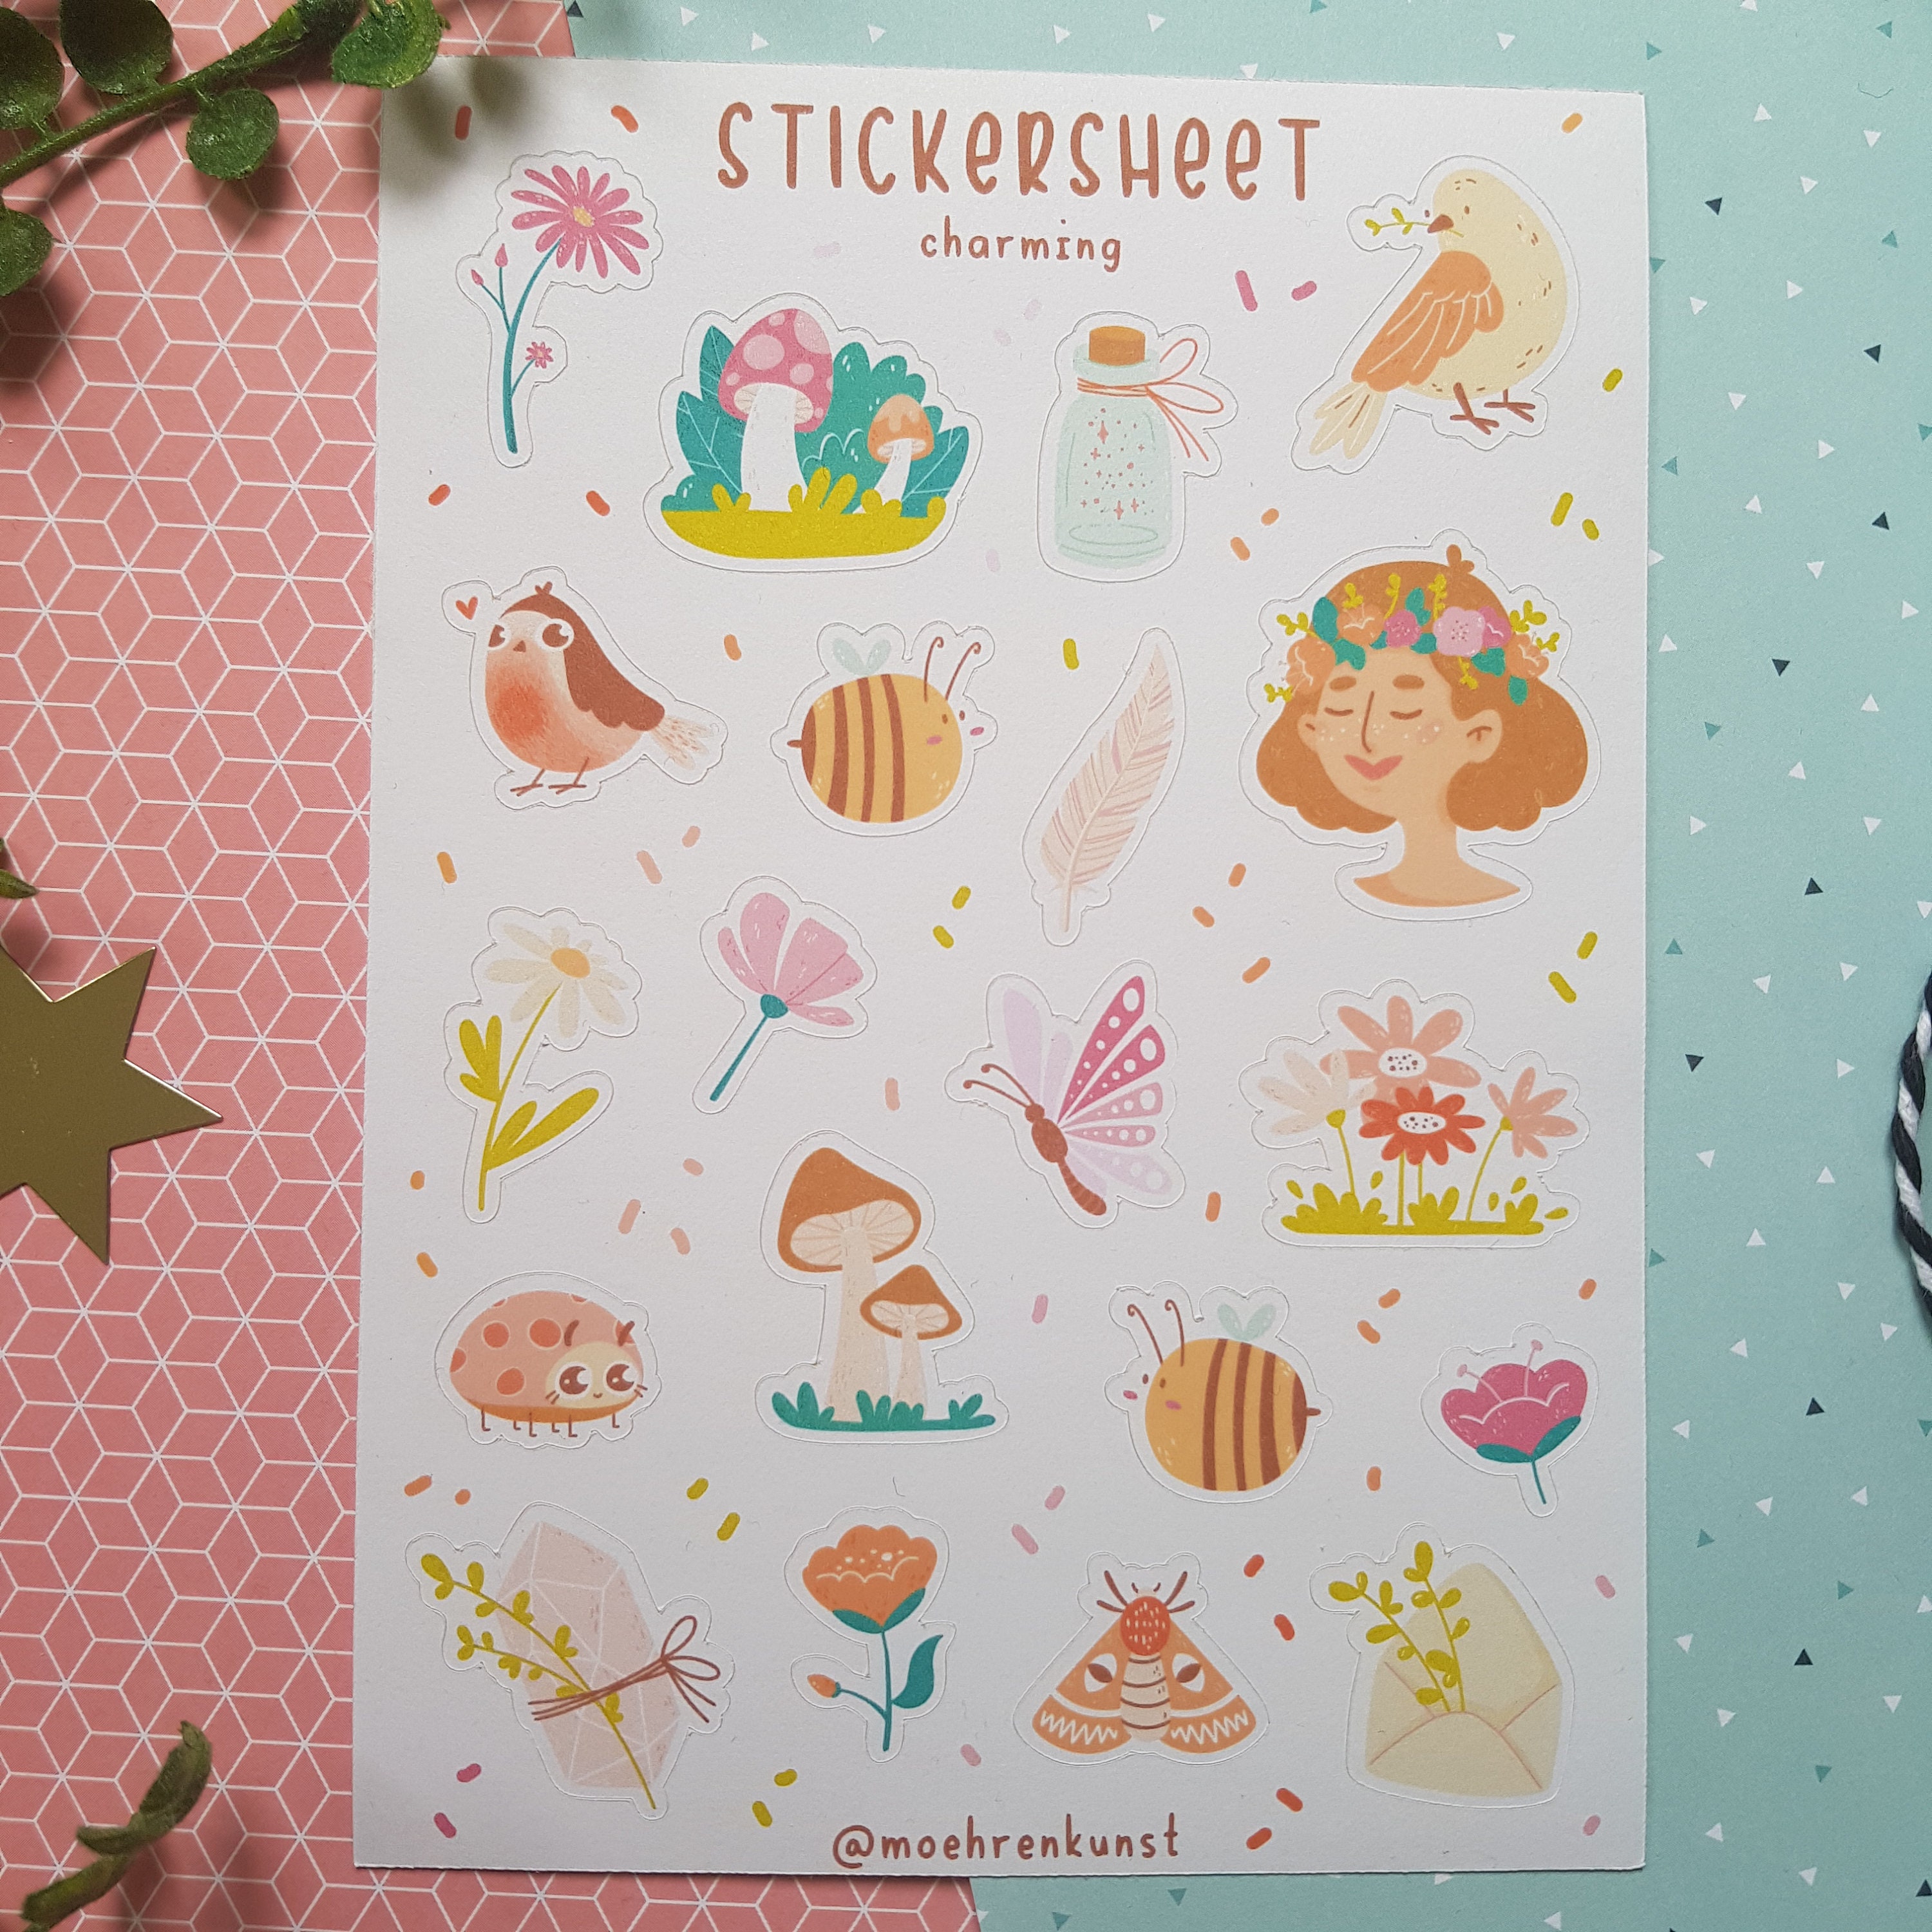 Bullet Journal stickers (17+ Brilliant Stickers For Your Planner